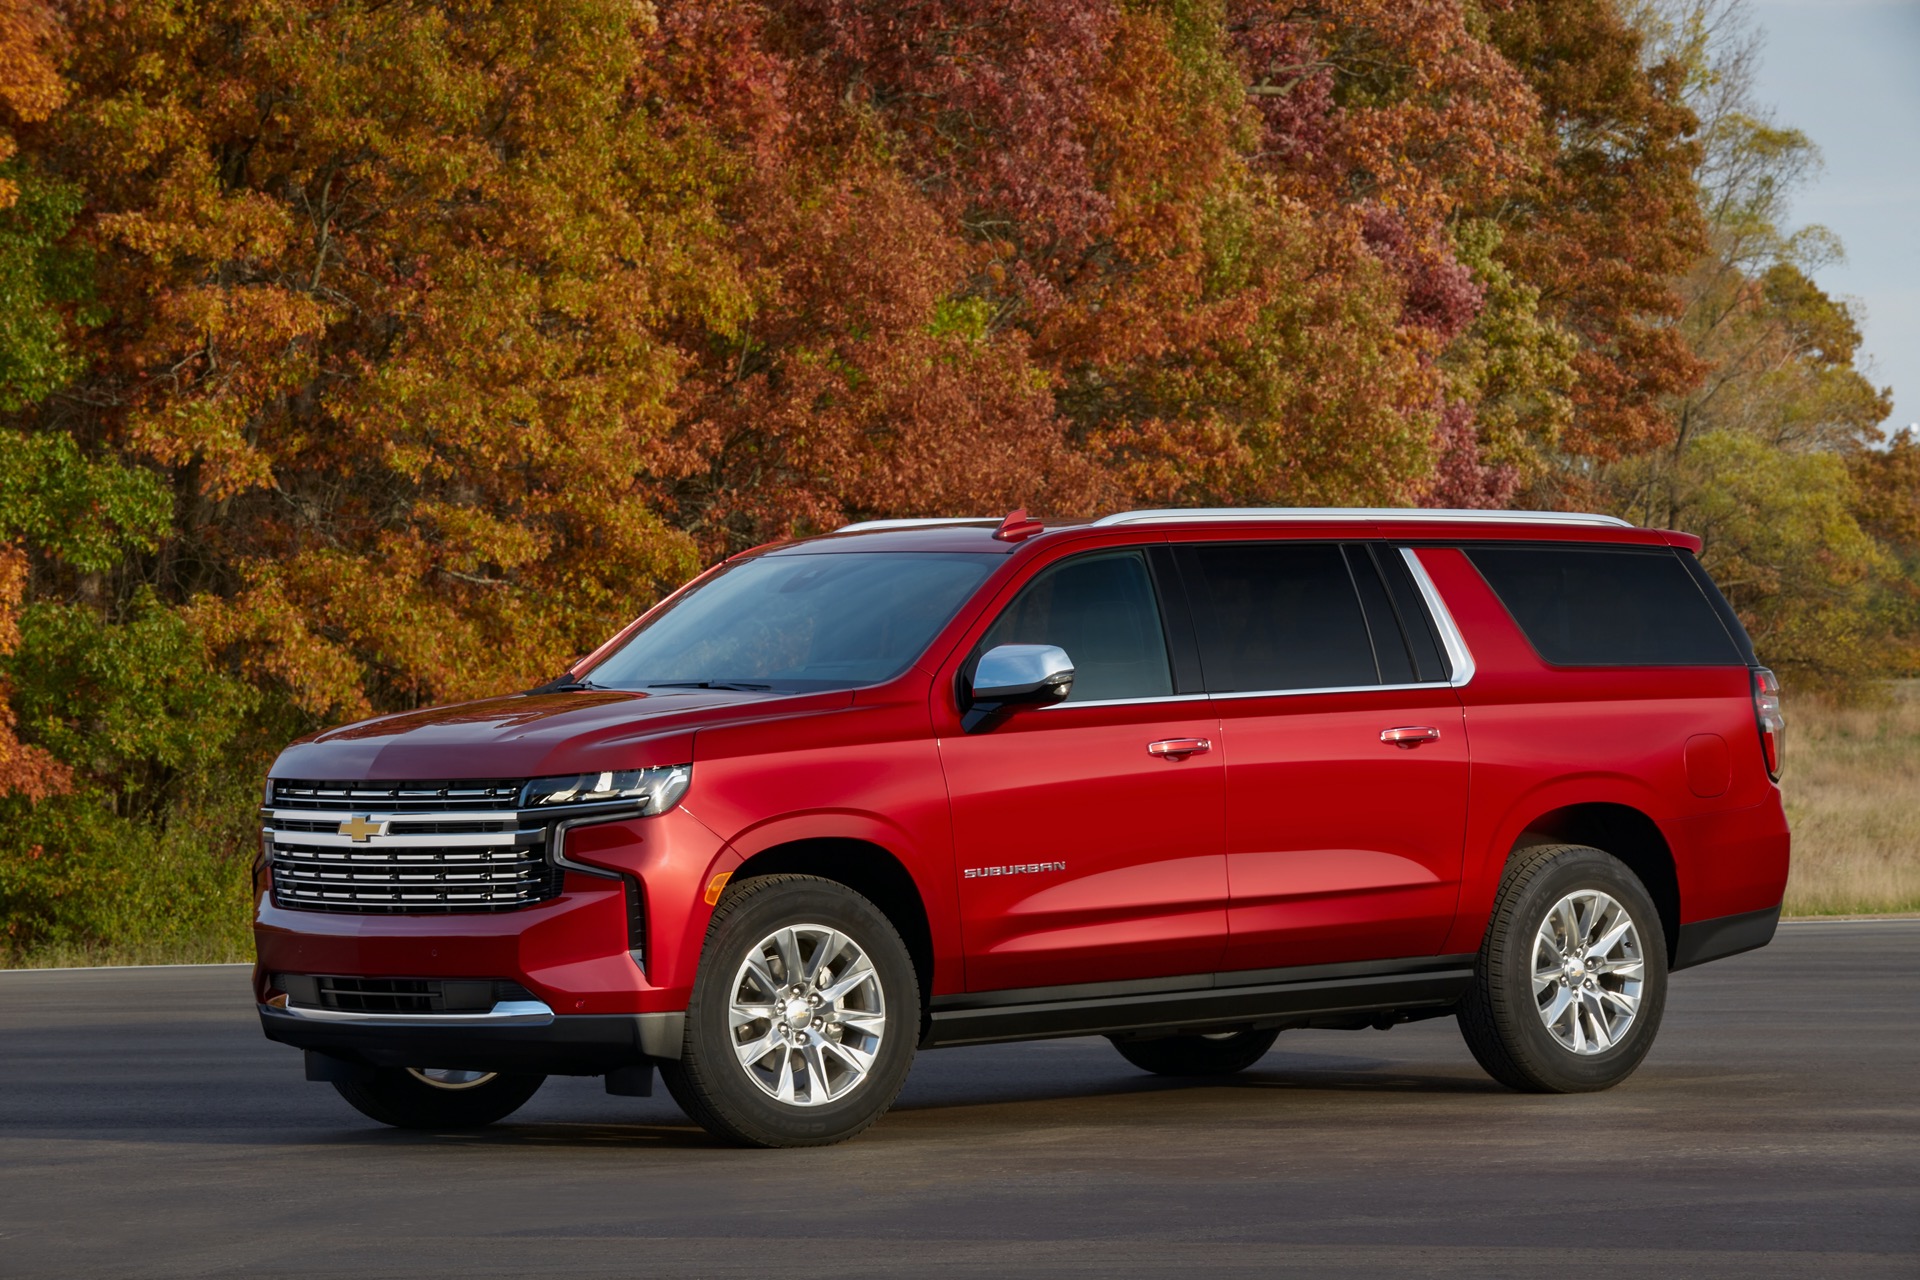 2022 Chevrolet Suburban (Chevy) Review, Ratings, Specs, Prices, and